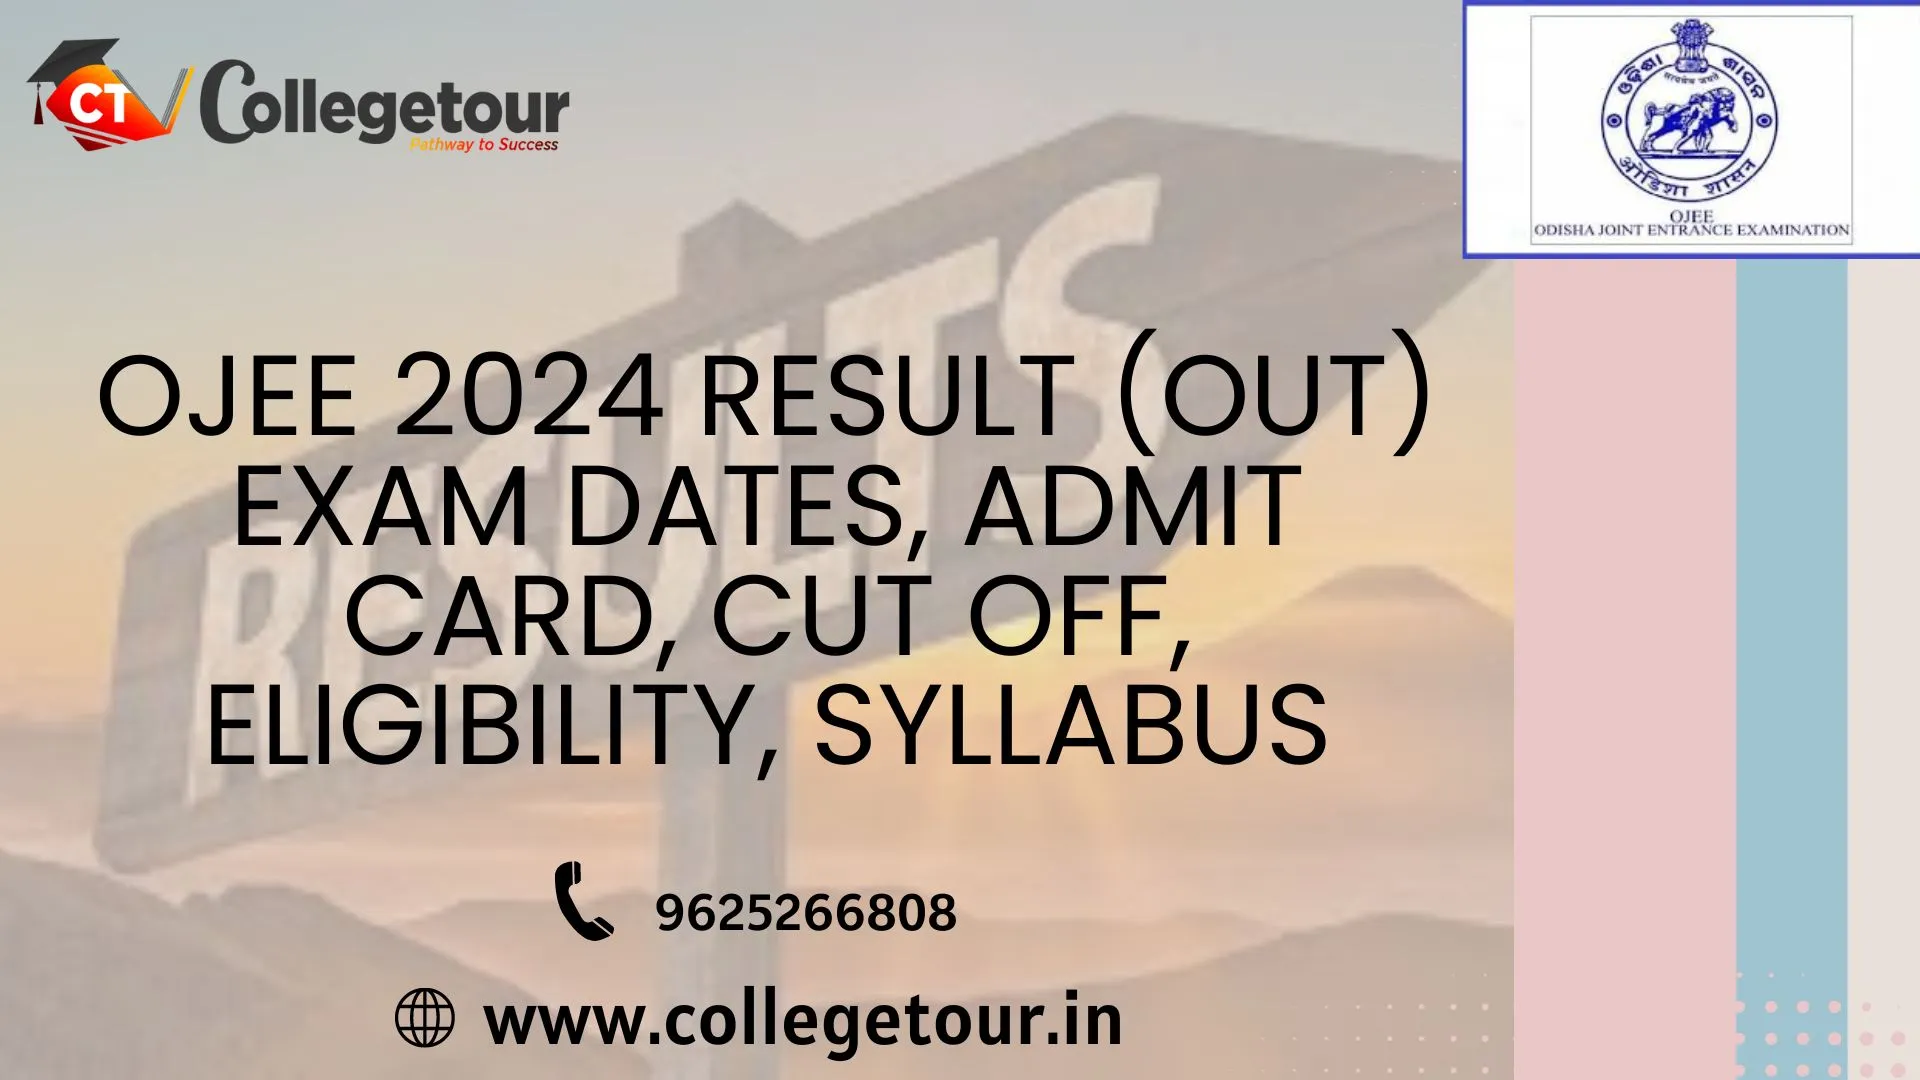 OJEE 2024 Result (OUT) Exam Dates, Admit Card, Cut Off, Eligibility, Syllabus